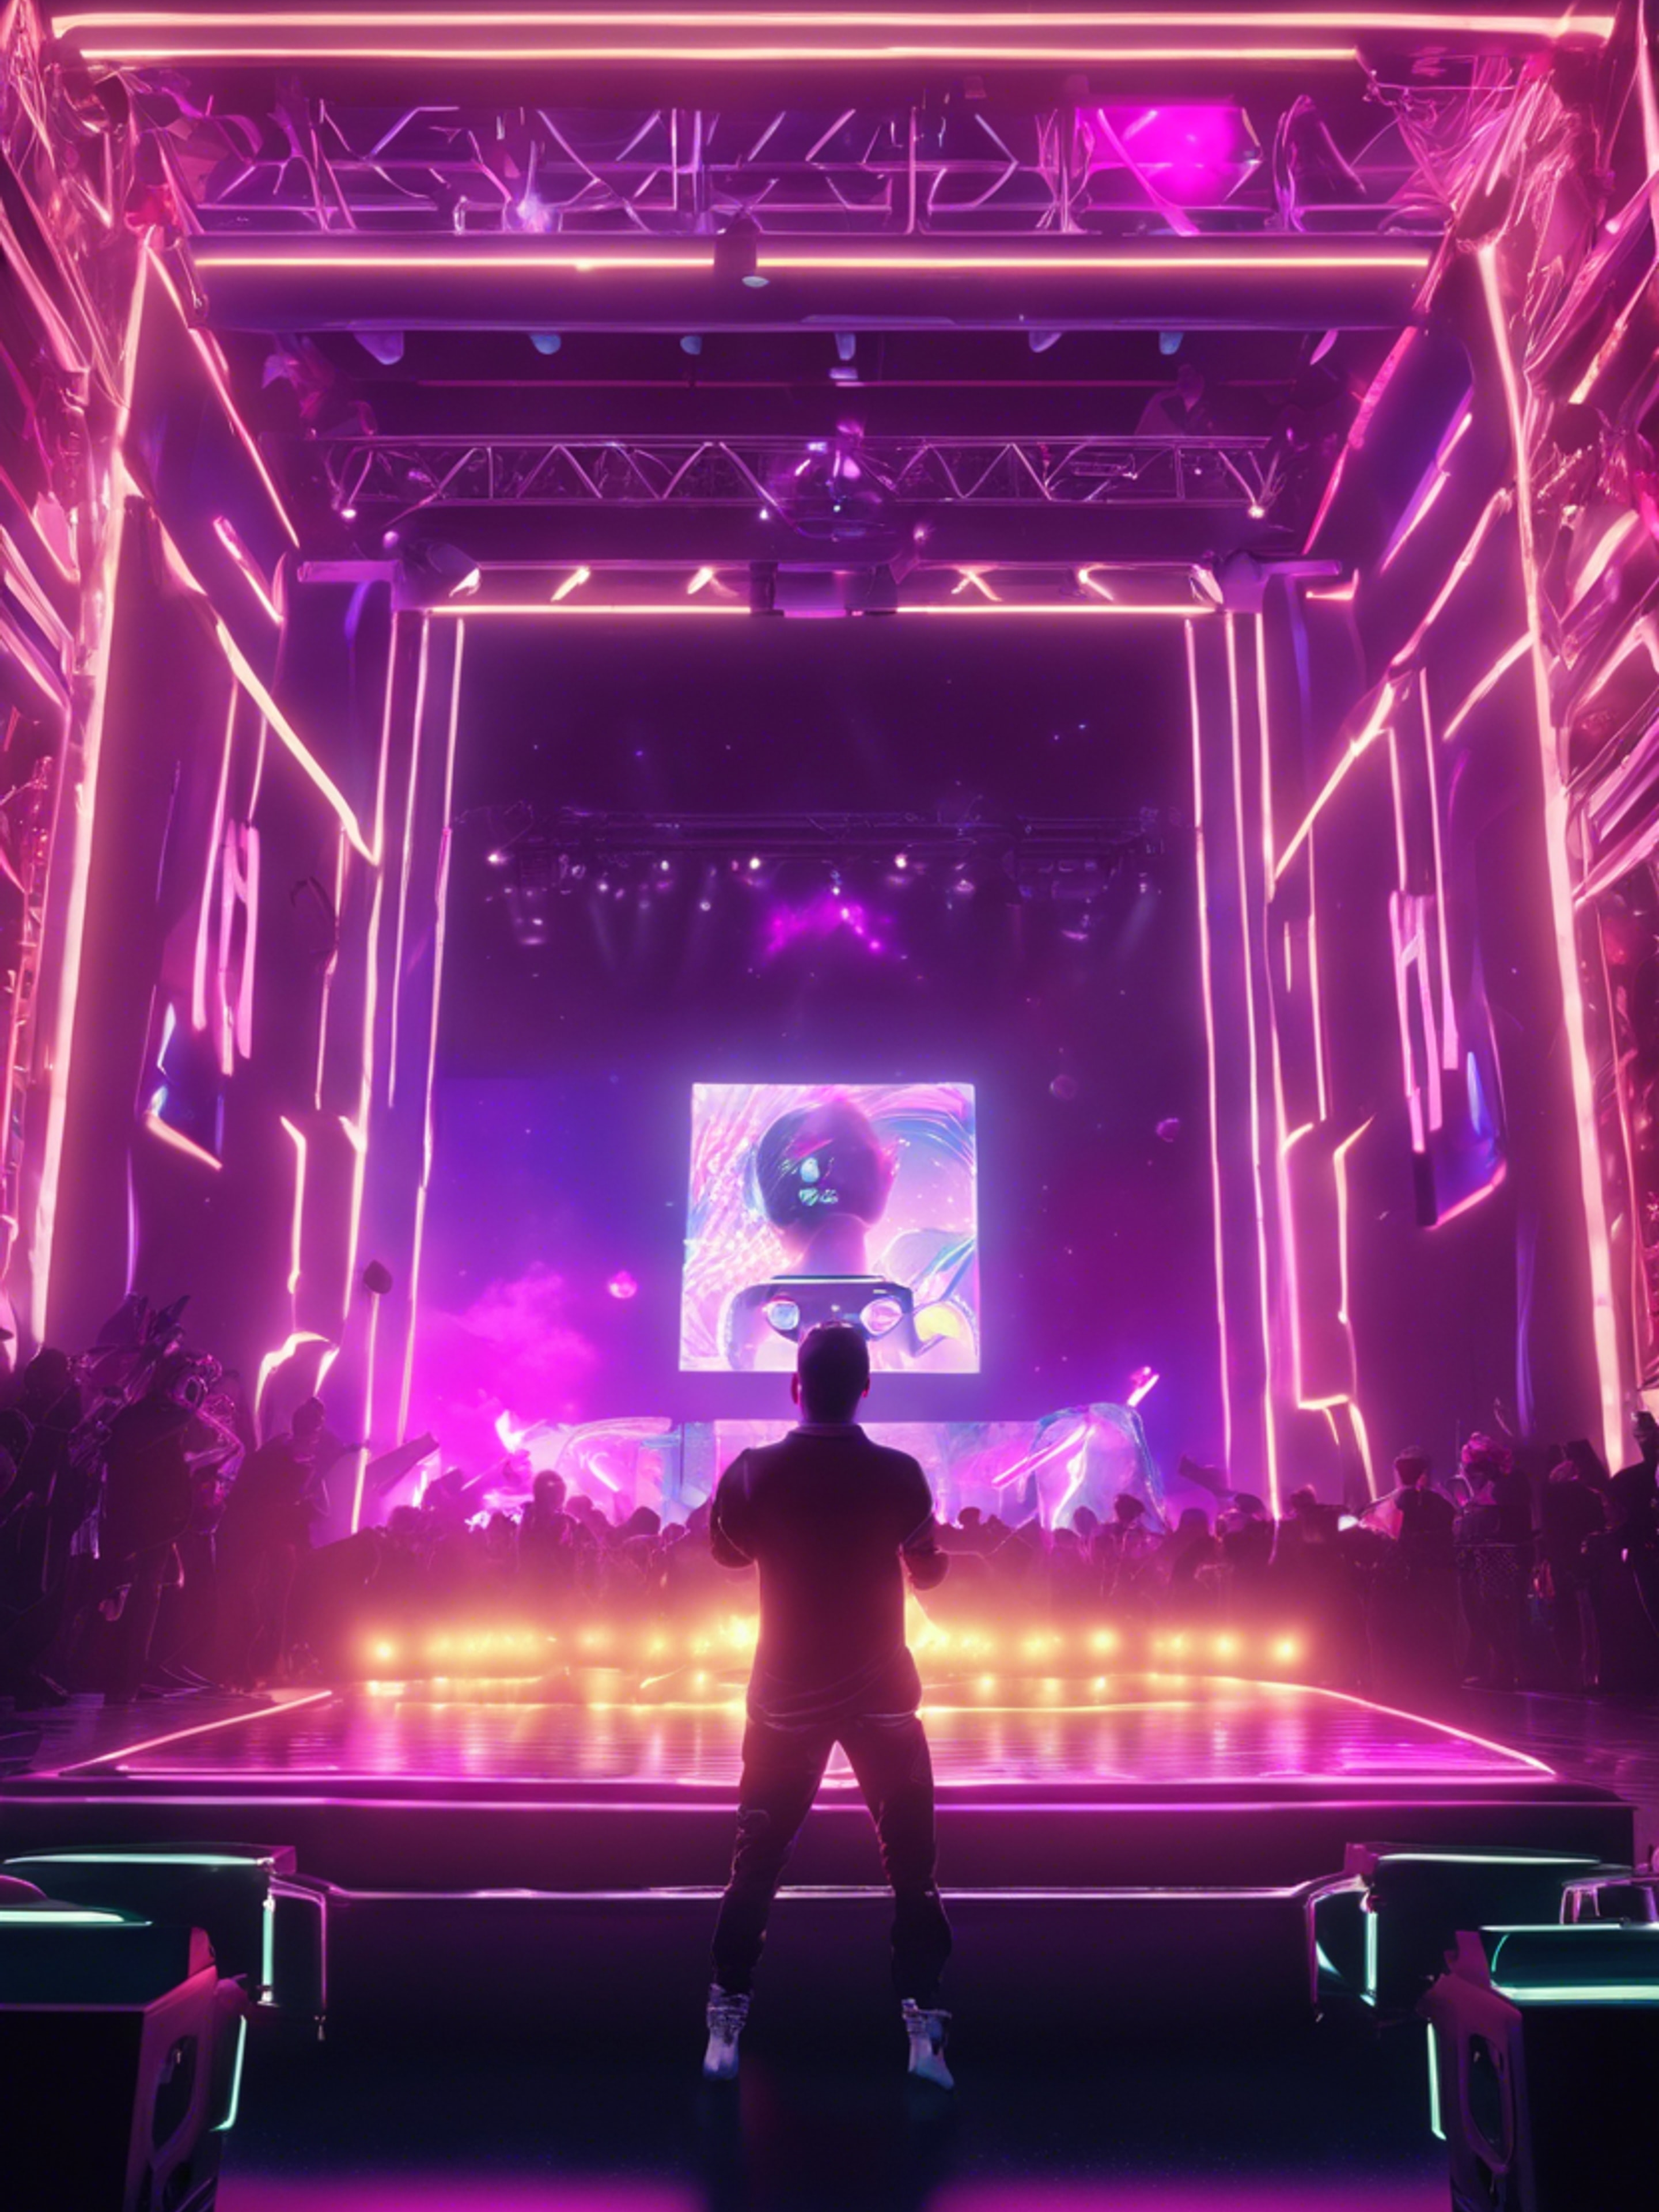 A virtual concert in a Y2K gaming environment, with neon spotlights showcasing a digital avatar performing onstage. Tapéta[570c0802add746f5a0b1]